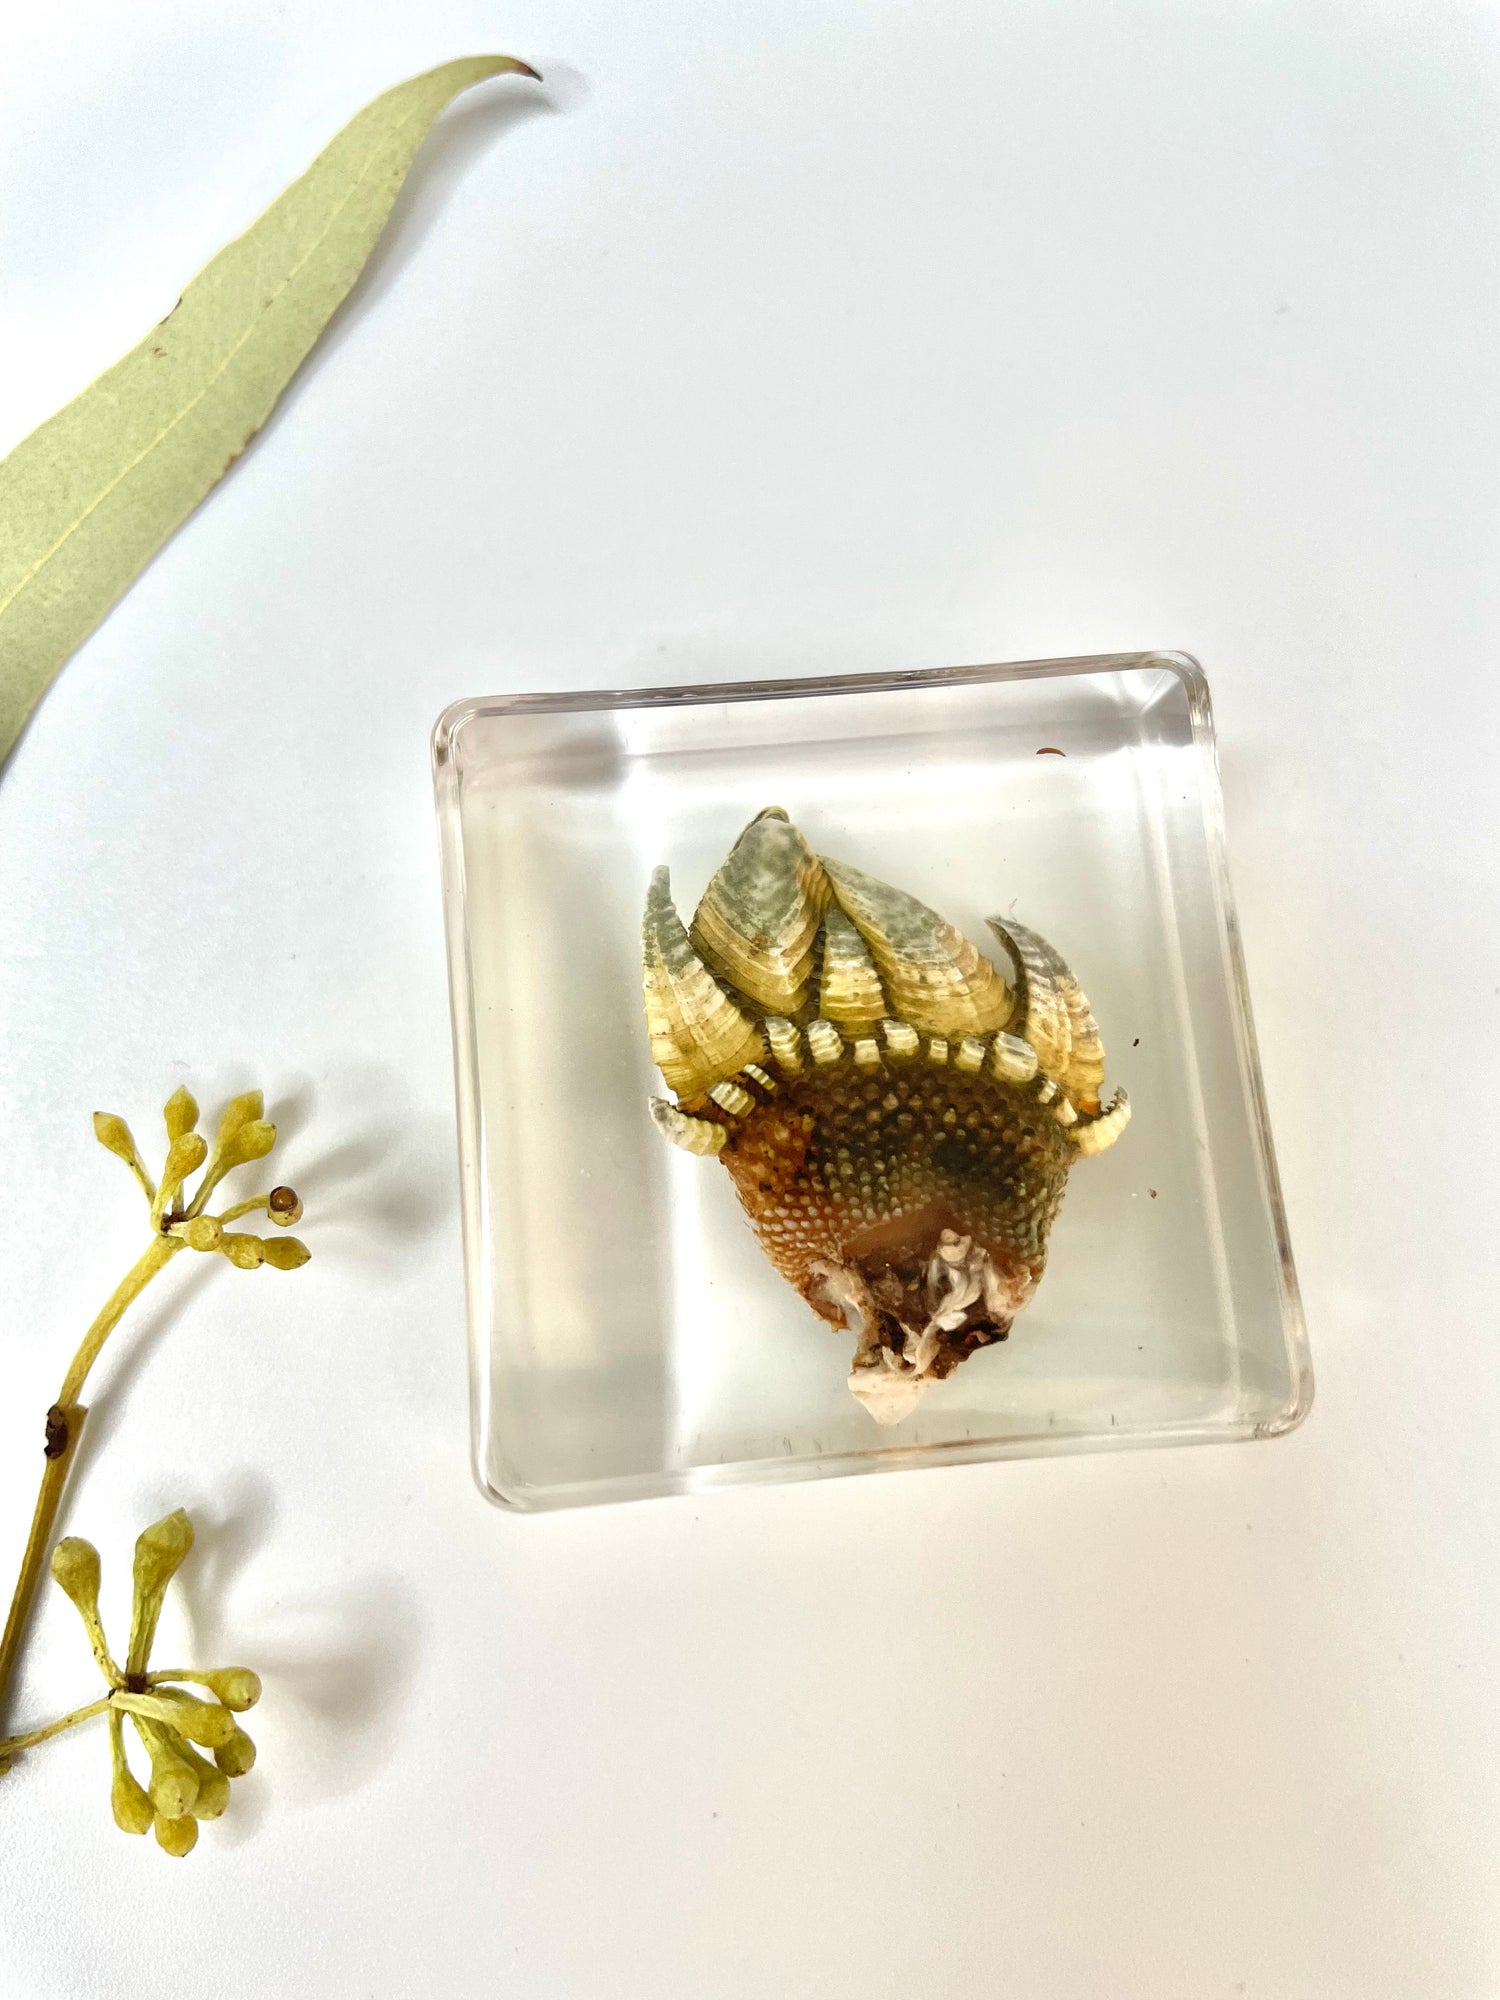 Animals Specimens Resin Blocks Bugs Butterfly Insect Fish Crab Specimens Toy - HAPPY GUMNUT